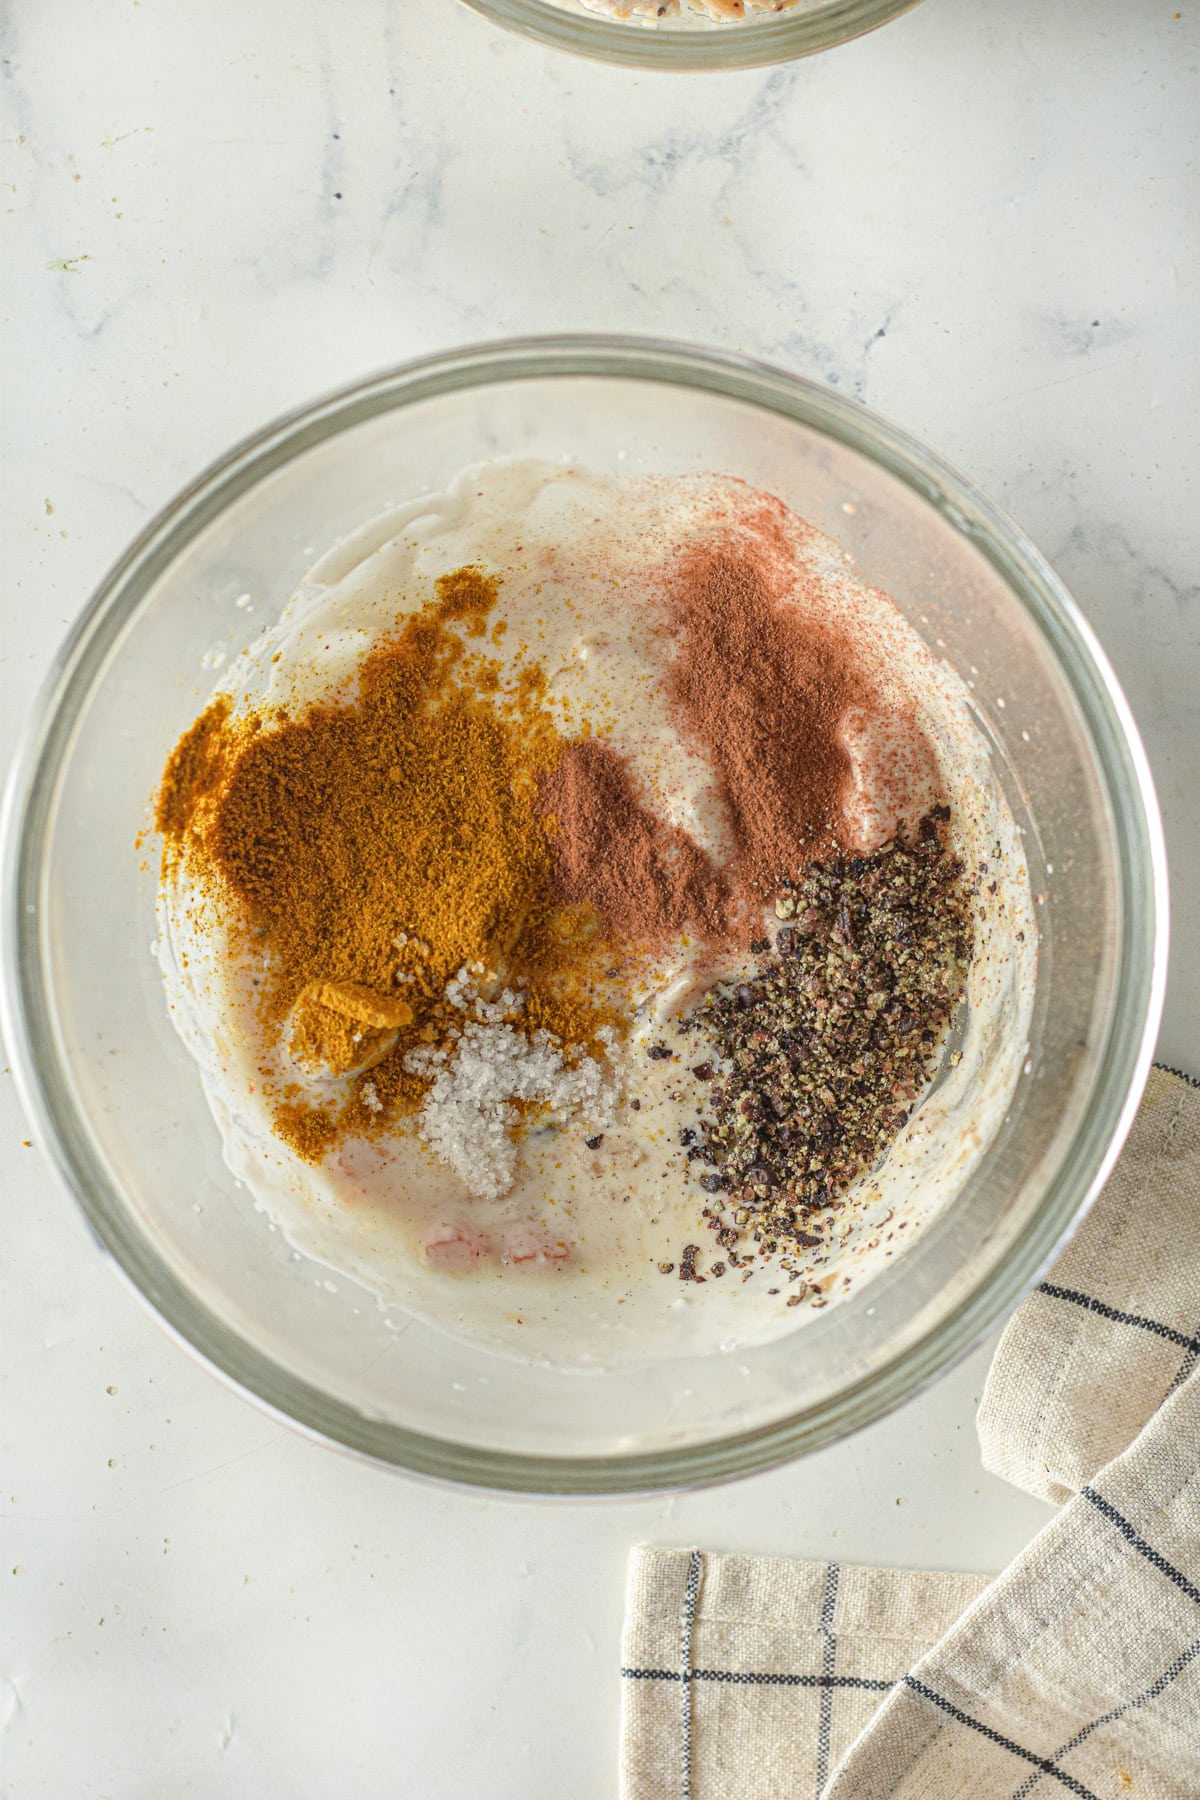 Spices added to yogurt and mayo mixture